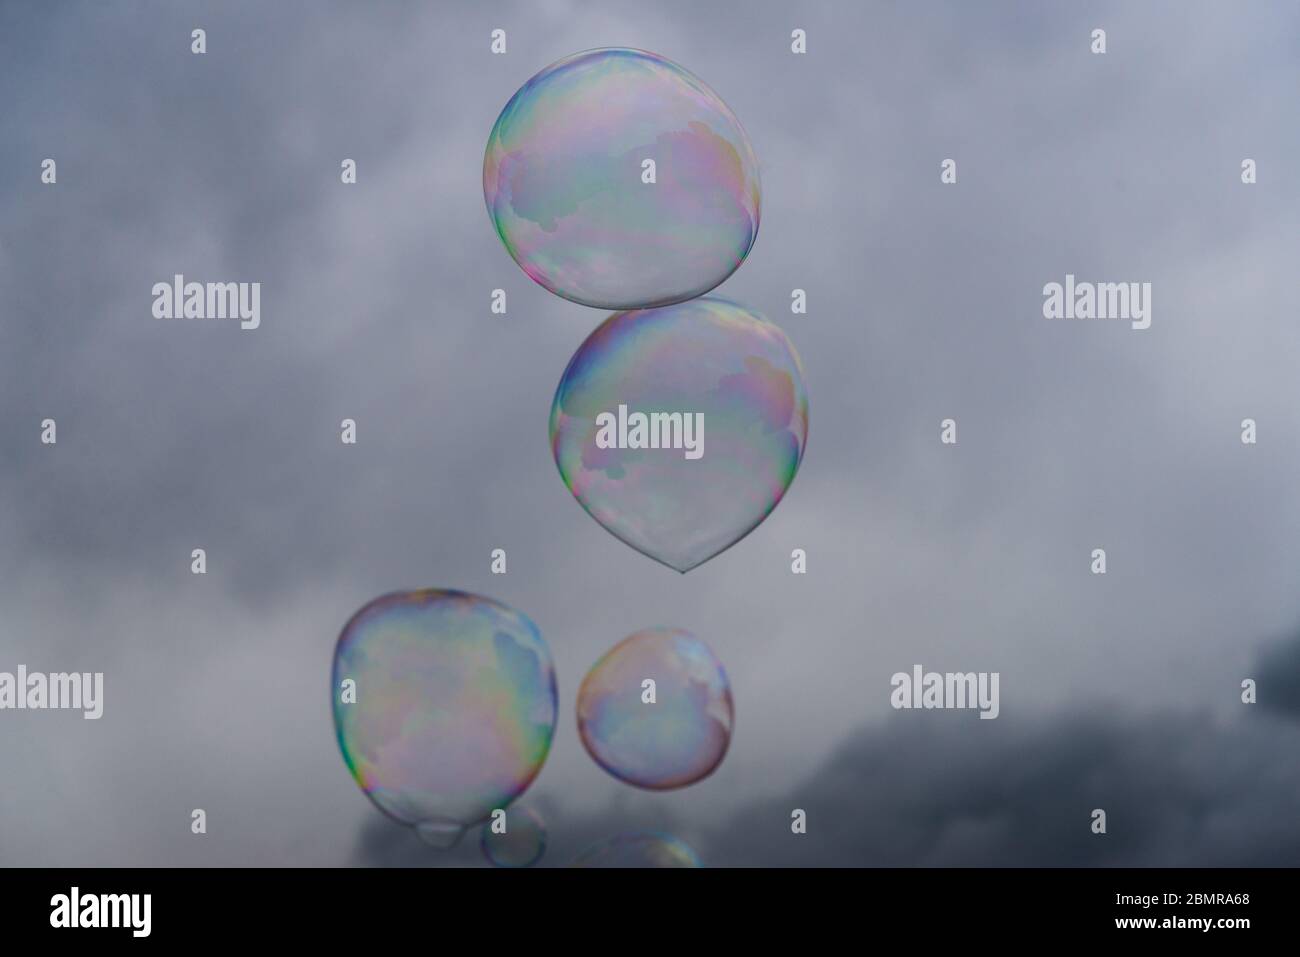 Big soap bubbles against the background of cloudy sky. Stock Photo